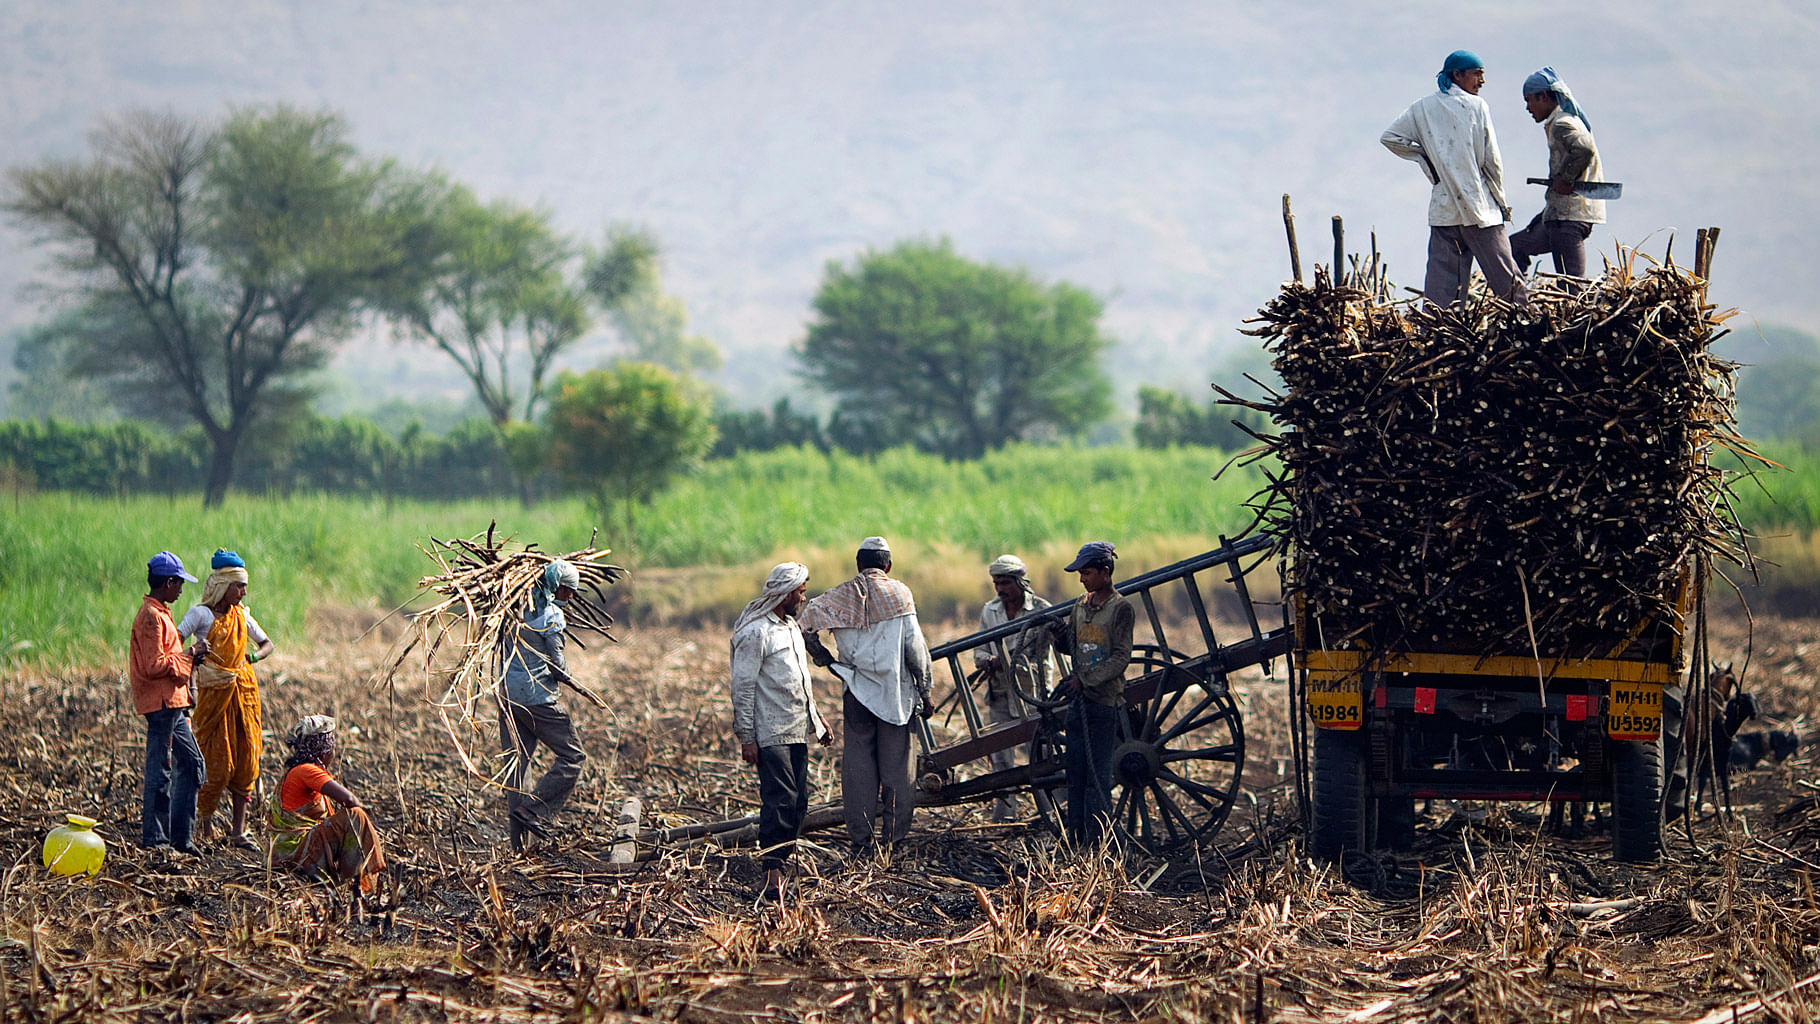 Farmers and labourers load harvested sugarcane onto a trailer in a field outside Gove village in Satara district, about 260 km  south of Mumbai, May 10, 2011. (Photo: Reuters)&nbsp;